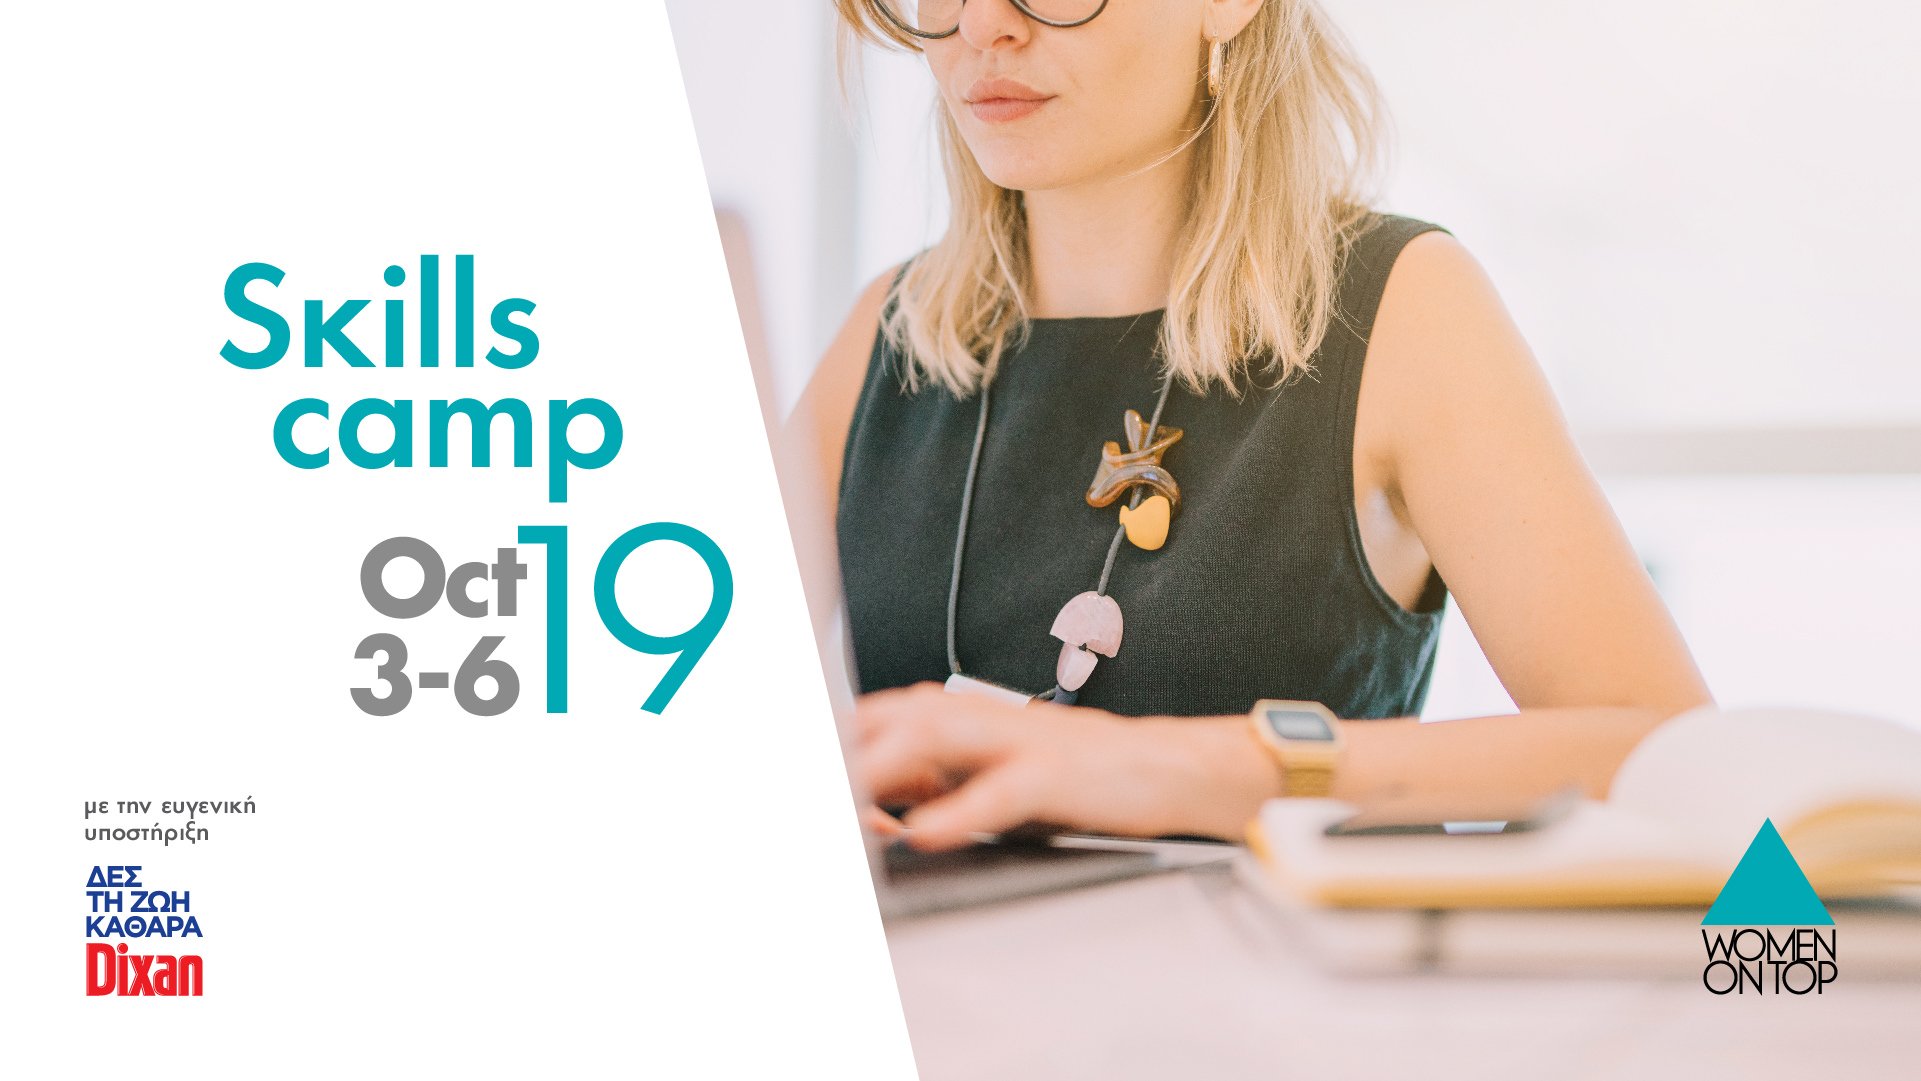 SkillCamp 2019 Thes facebook event